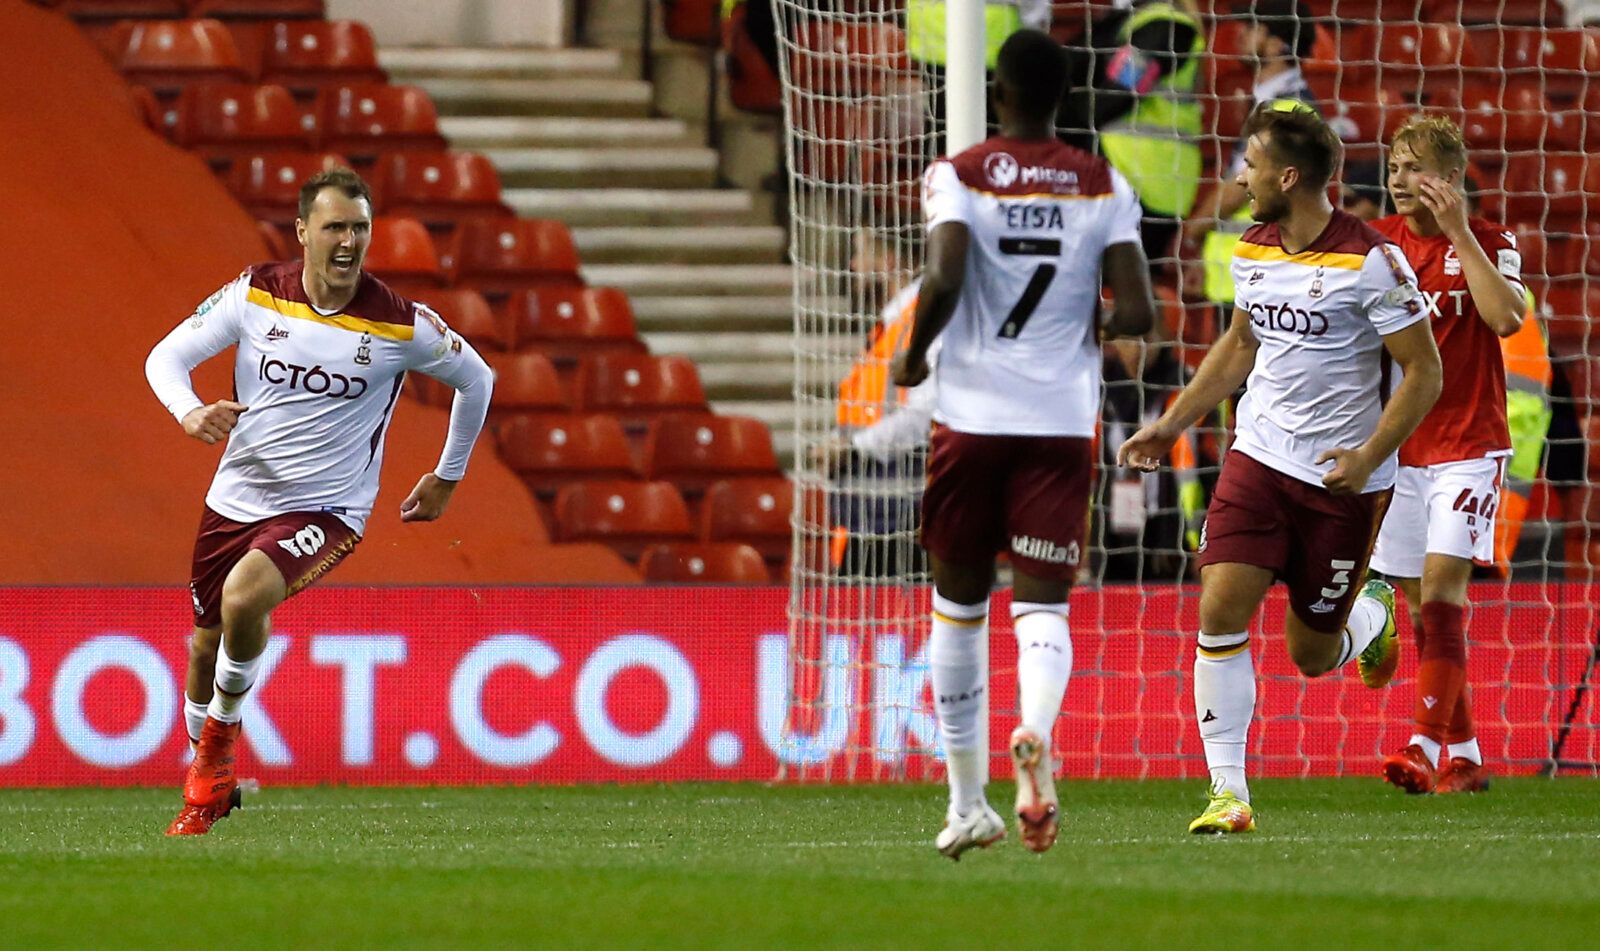 Soccer Football - Carabao Cup - First Round - Nottingham Forest v Bradford City - The City Ground, Nottingham, Britain - August 11, 2021 Bradford City's Callum Cooke celebrates scoring their first goal Action Images/Craig Brough EDITORIAL USE ONLY. No use with unauthorized audio, video, data, fixture lists, club/league logos or 'live' services. Online in-match use limited to 75 images, no video emulation. No use in betting, games or single club /league/player publications.  Please contact your a